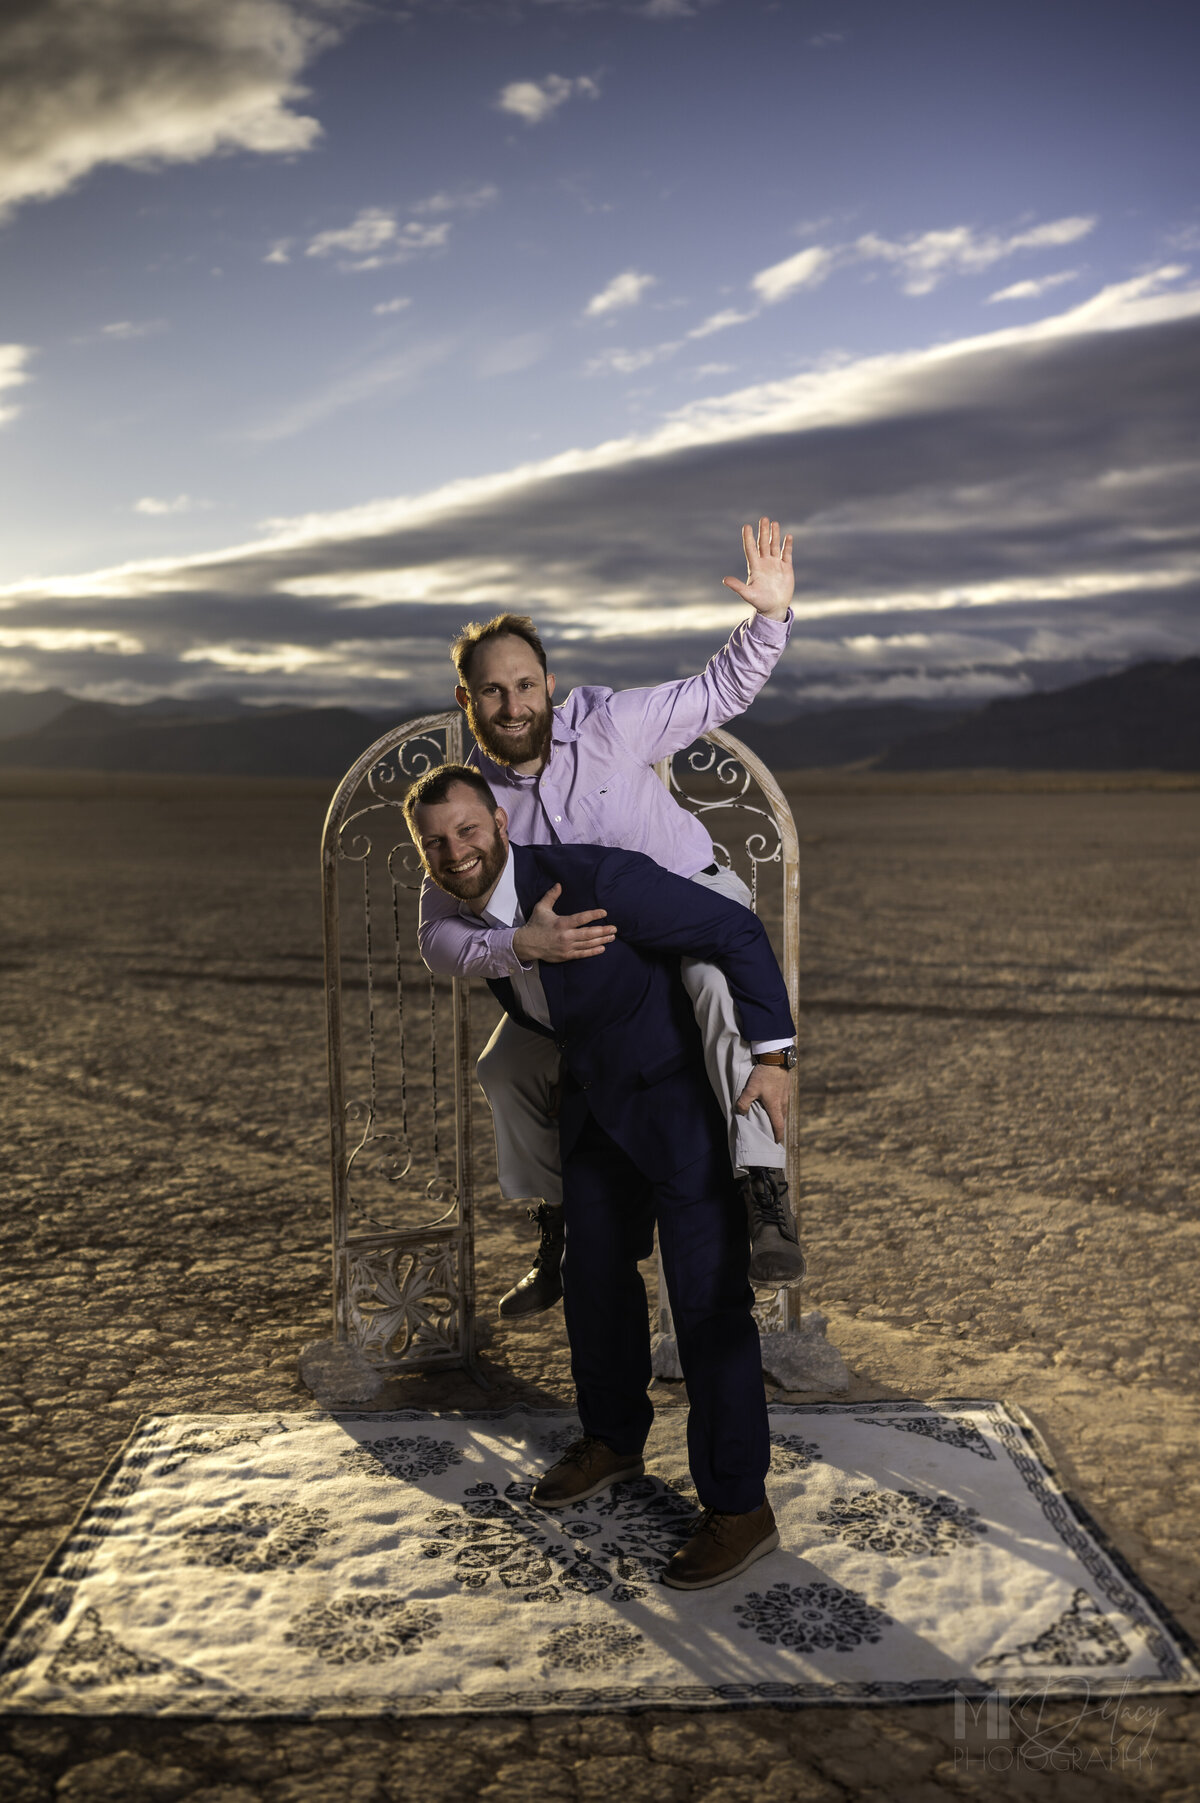 Best man Brother on Grooms back brother  Dry lake Bed elopement Blue Suit on Groom  flowers by michelle  bride in cream color wedding dress with deep  plunging  neckline mountain skyline  sunset las vegas wedding photographers mk delacy photography